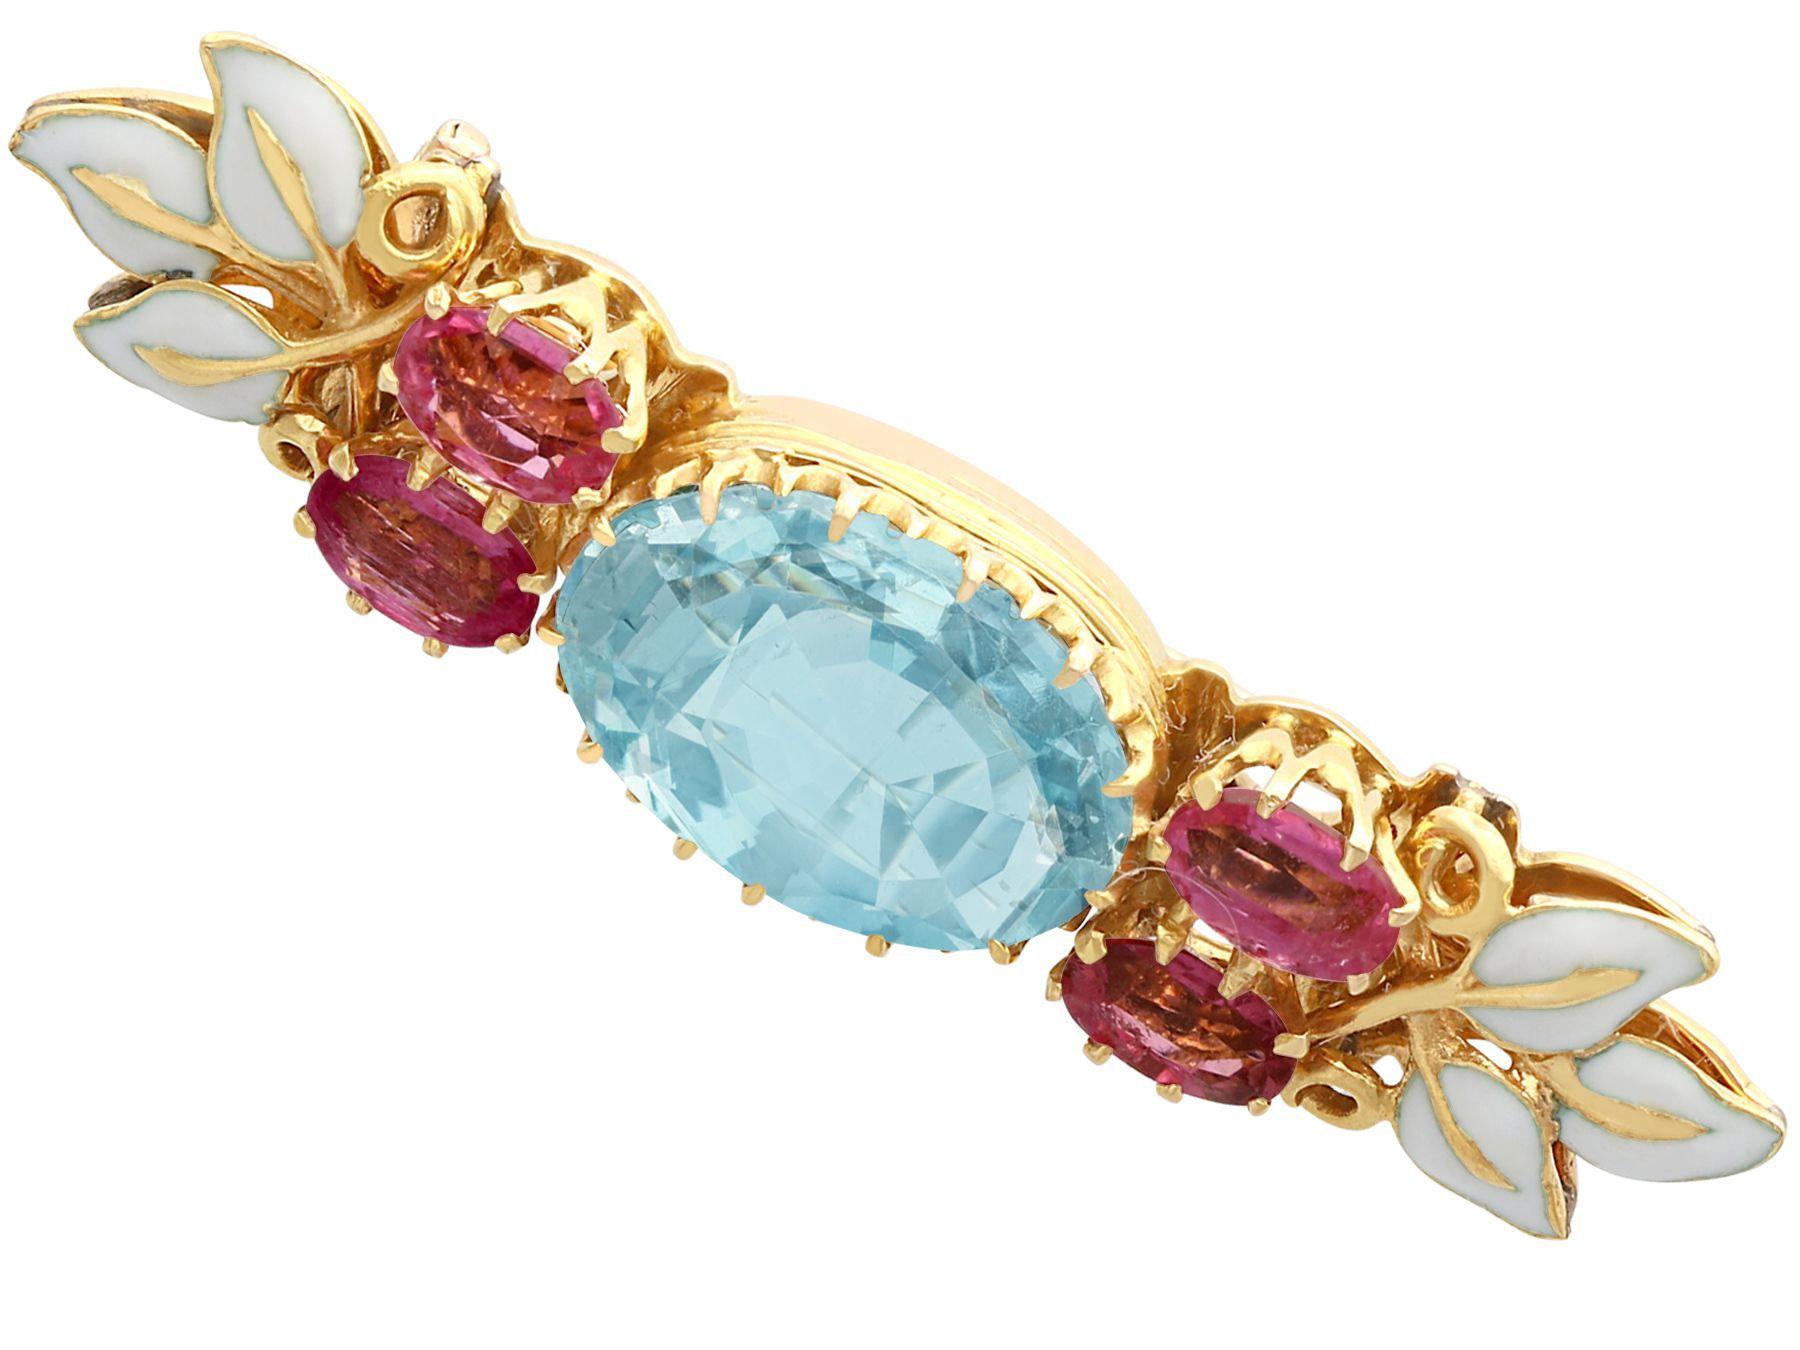 Oval Cut Victorian 2.84ct Aquamarine and 1.32ct Morganite Enamel and Yellow Gold Brooch For Sale